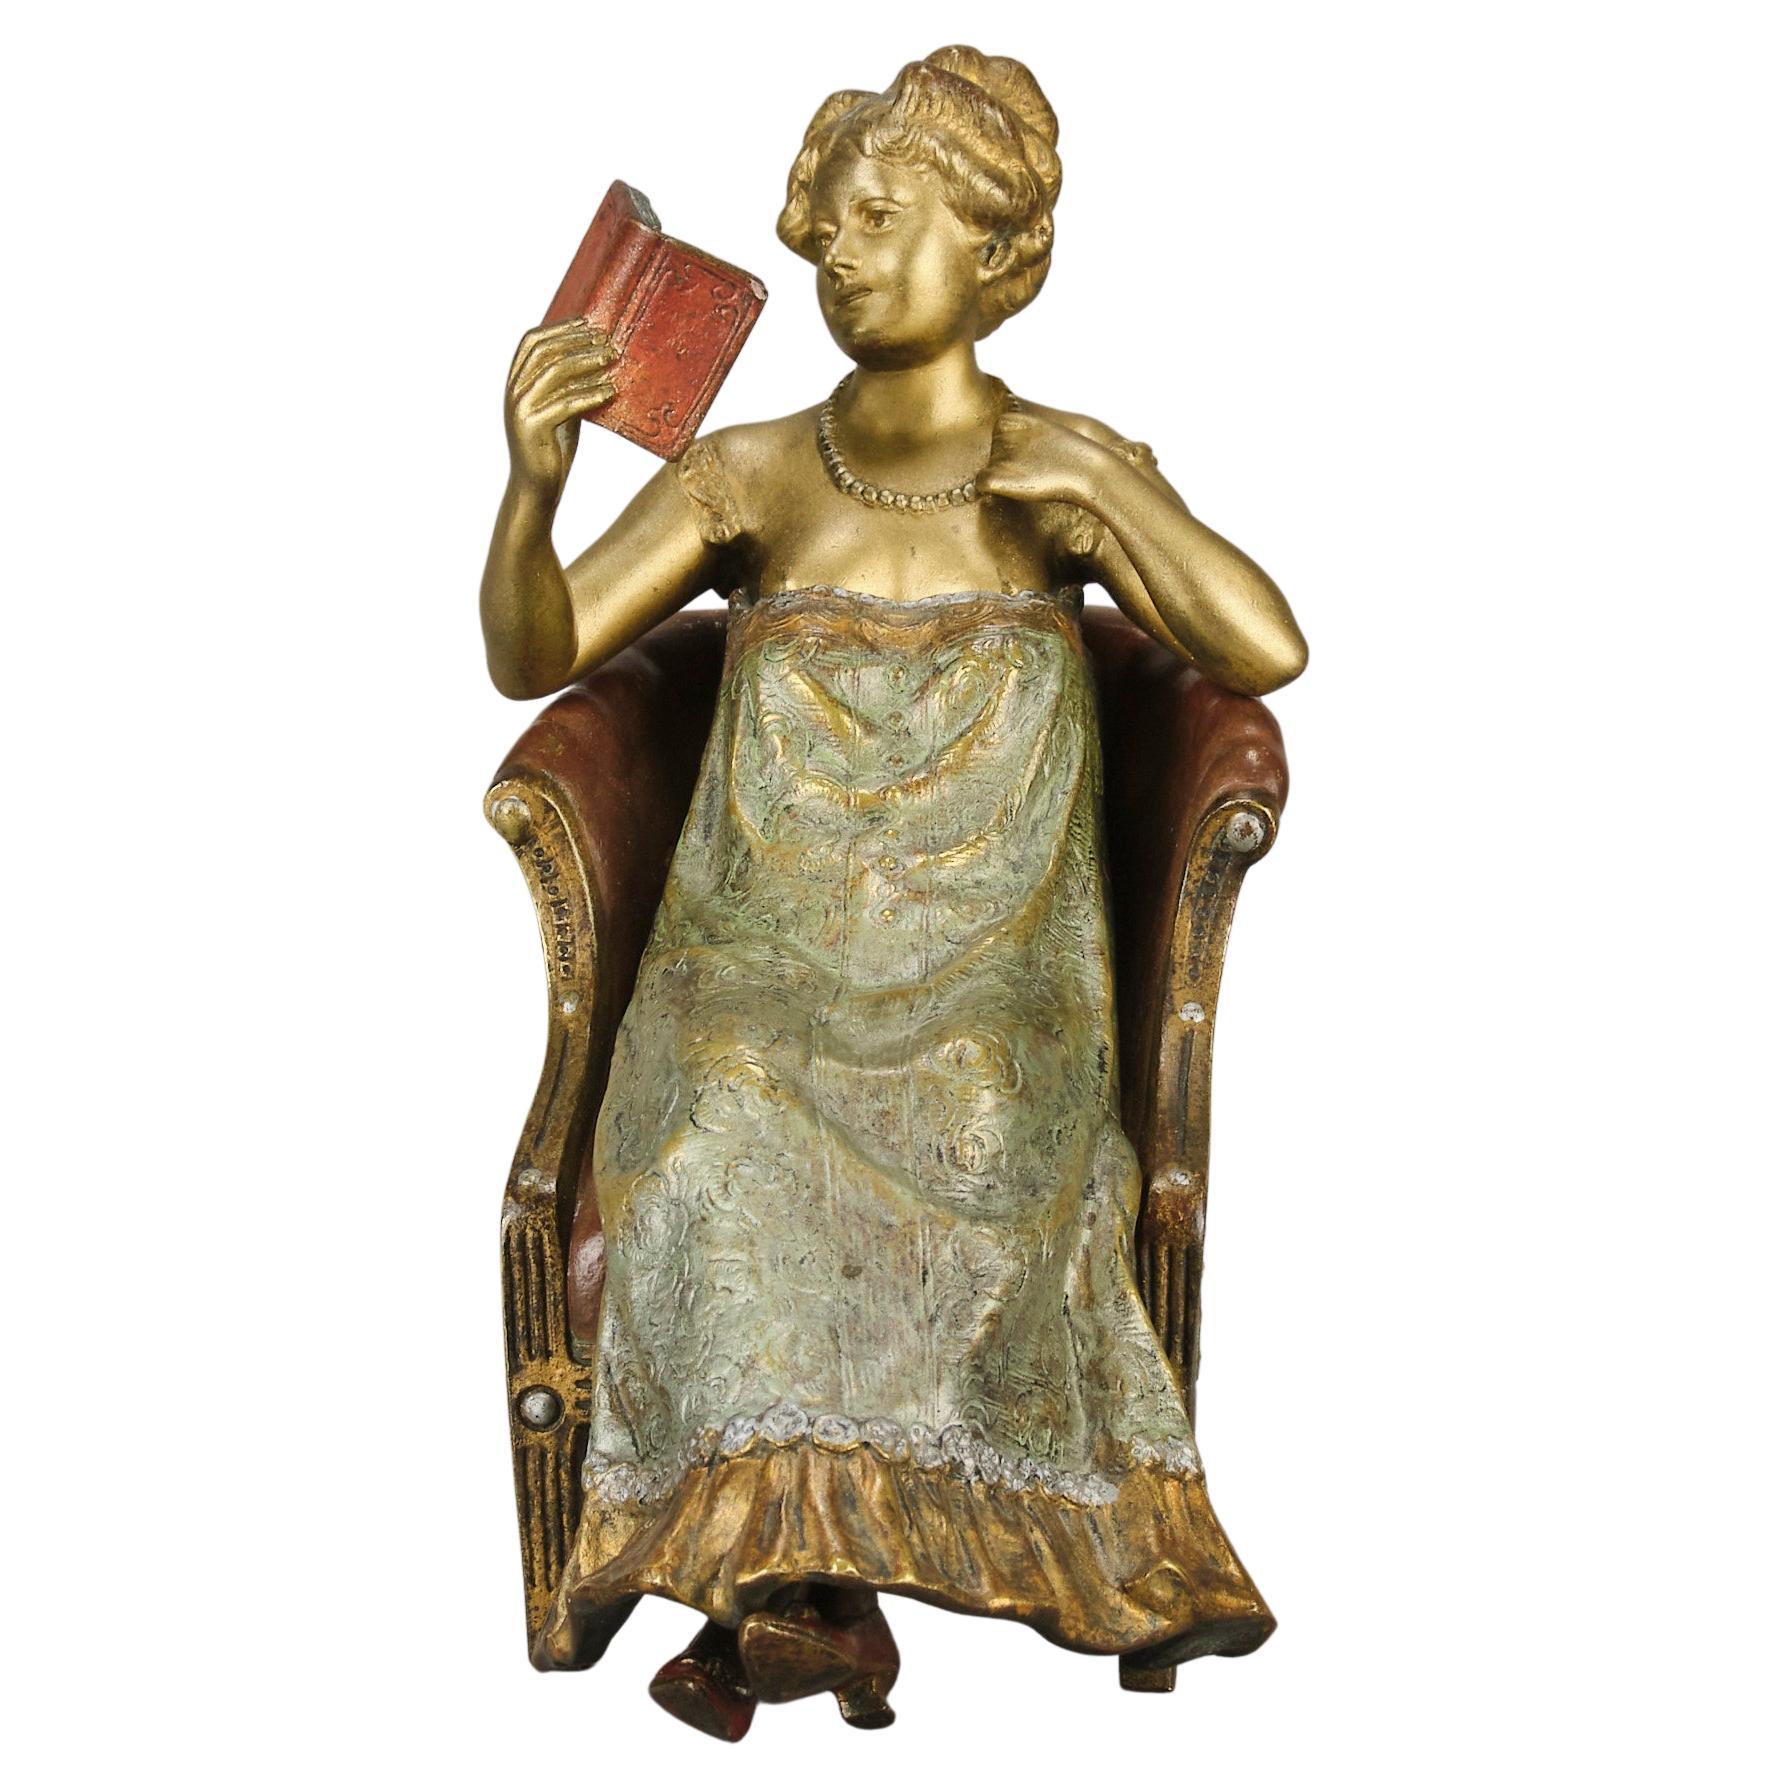 Early 20th Century Austrian Bronze Entitled "Lady Reading" by Franz Bergman For Sale